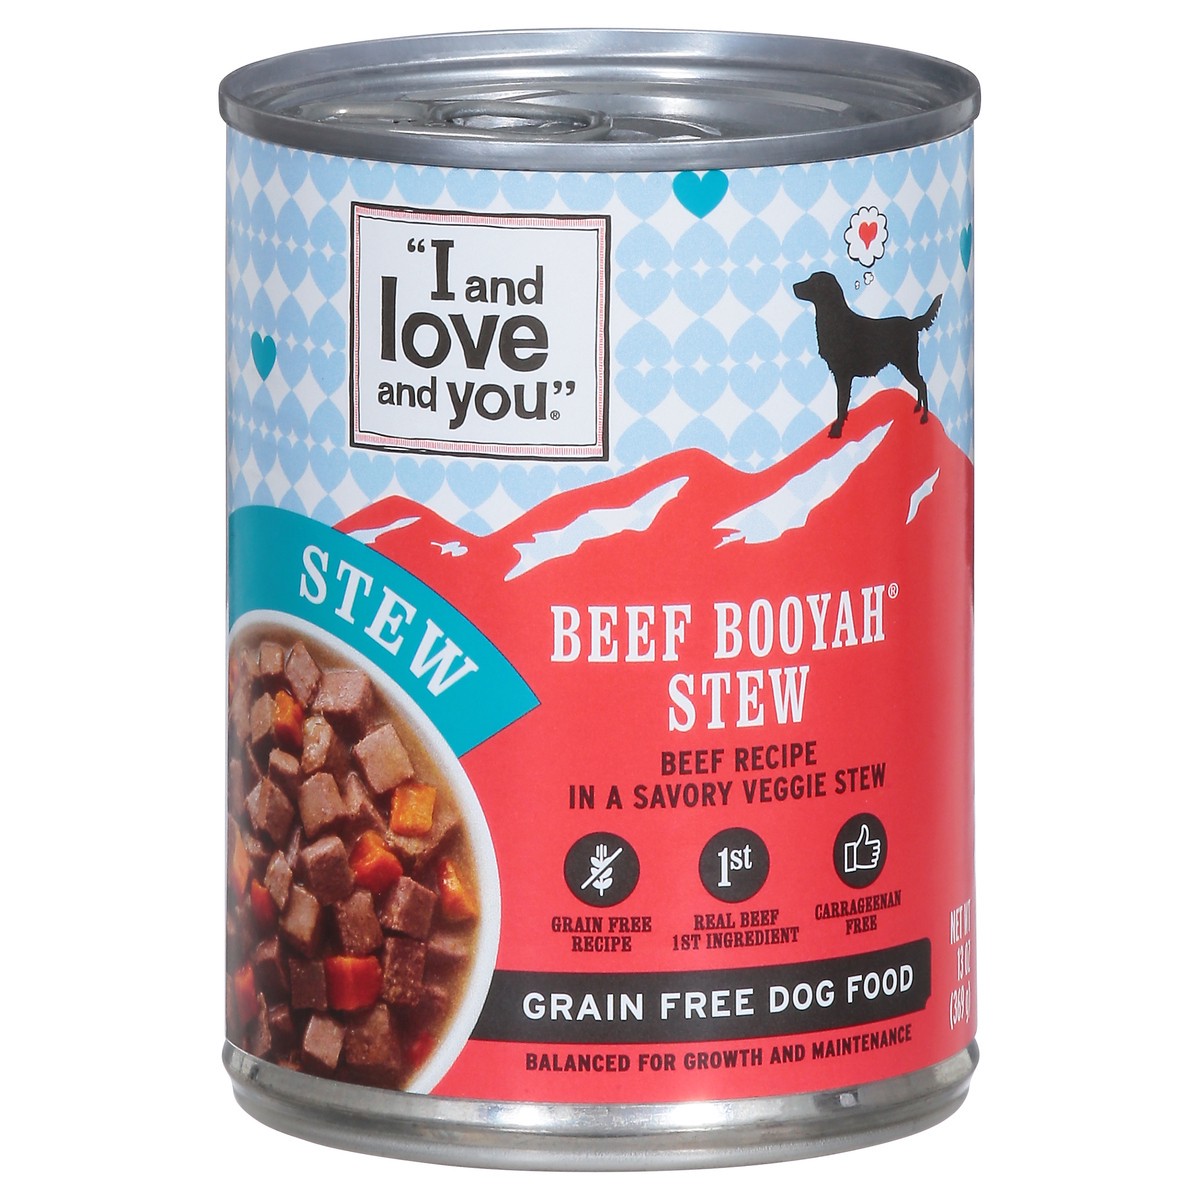 slide 1 of 29, I and Love and You Grain Free Beef Booyah Stew Dog Food 13 oz, 13 oz